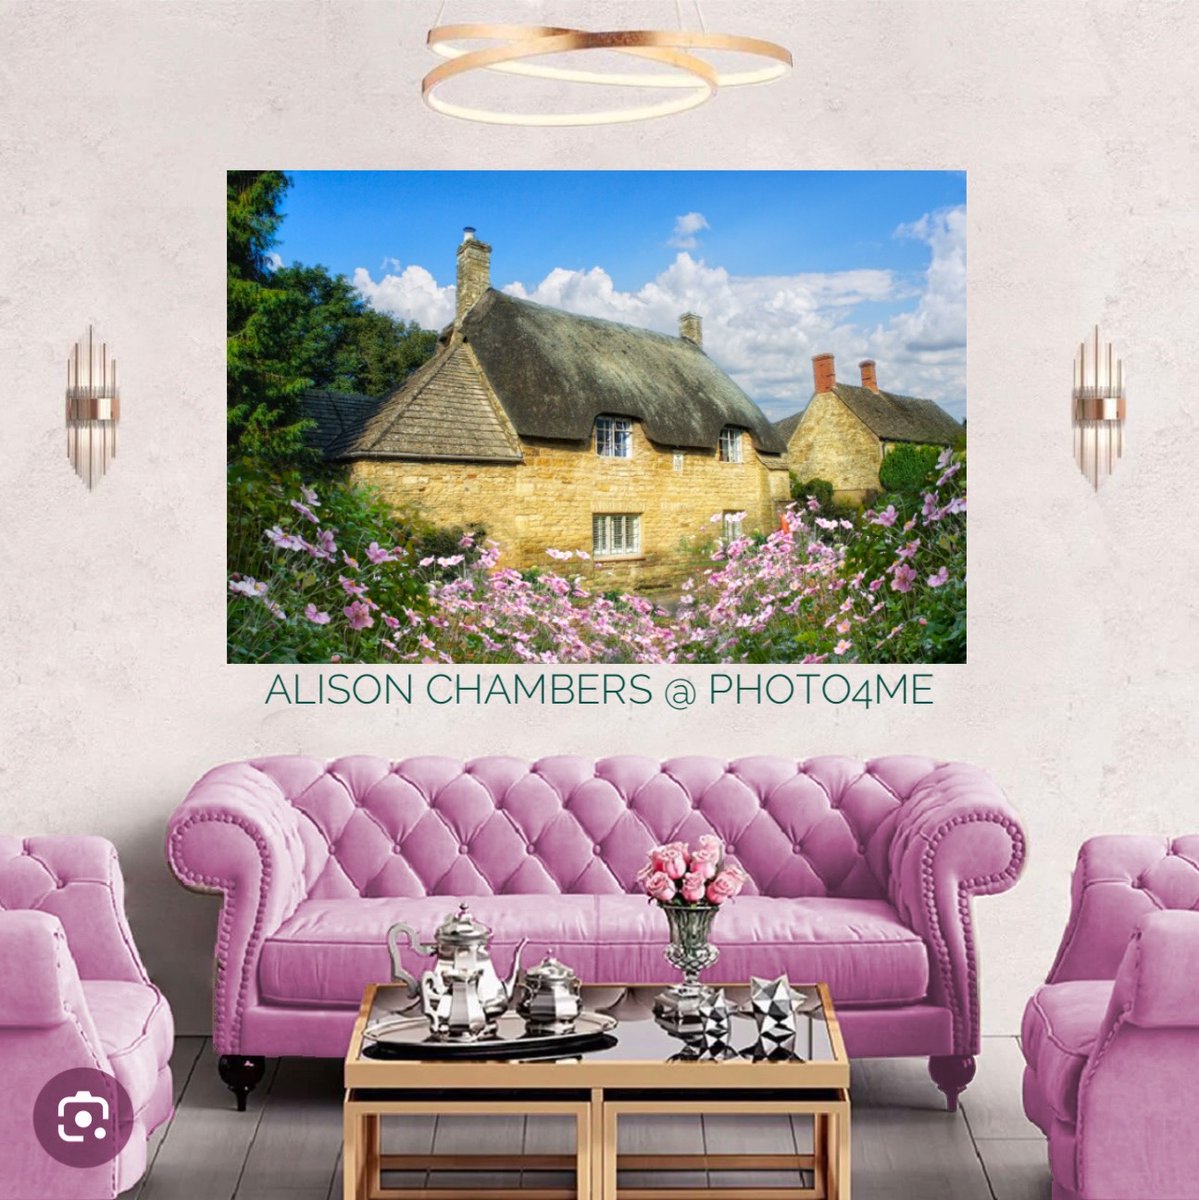 🩷English Thatched Cottage©️. Available from; shop.photo4me.com/1307799 & alisonchambers2.redbubble.com & 2-alison-chambers.pixels.com #englishthatchedcottage #englishcottage #cottage #countrycottage #cottagestyle #cottagedecor #cottagewallart #realcottages #cottagecore #CottageCharm